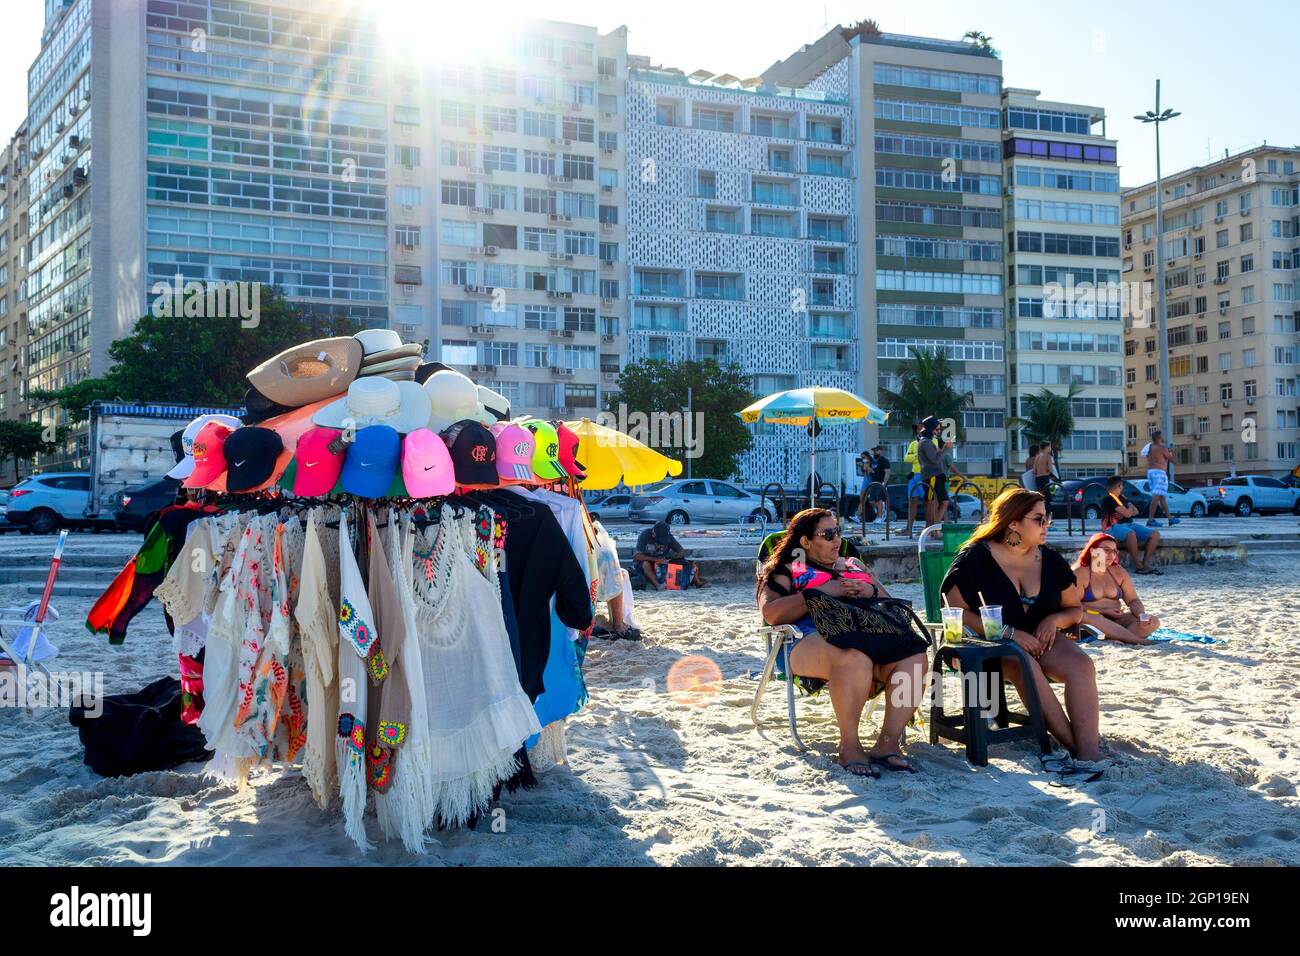 Small business selling clothes in the sand of the Copacabana Beach in Rio de Janeiro, Brazil. This place is a famous tourist attraction in the city. Stock Photo